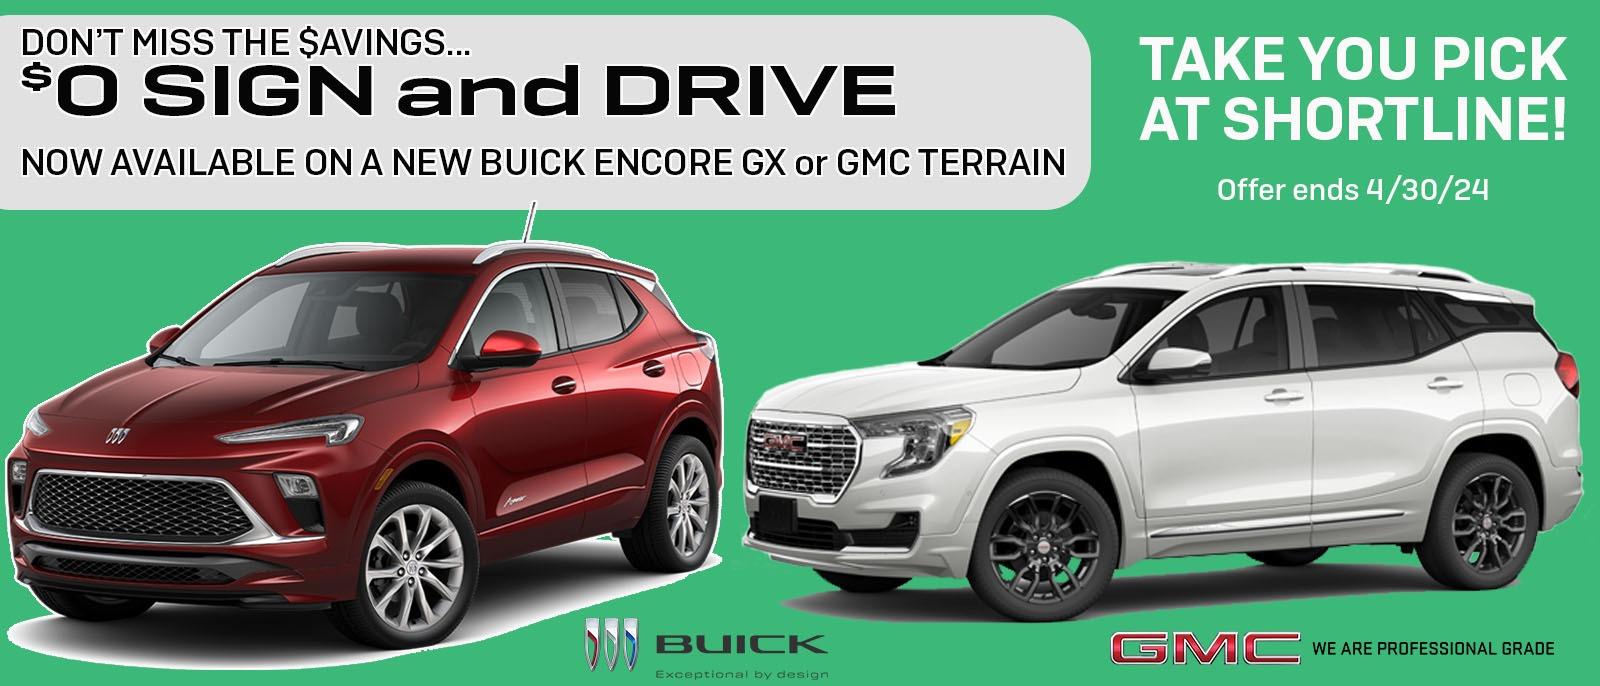 Sign and Drive at Shortline Buick GMC